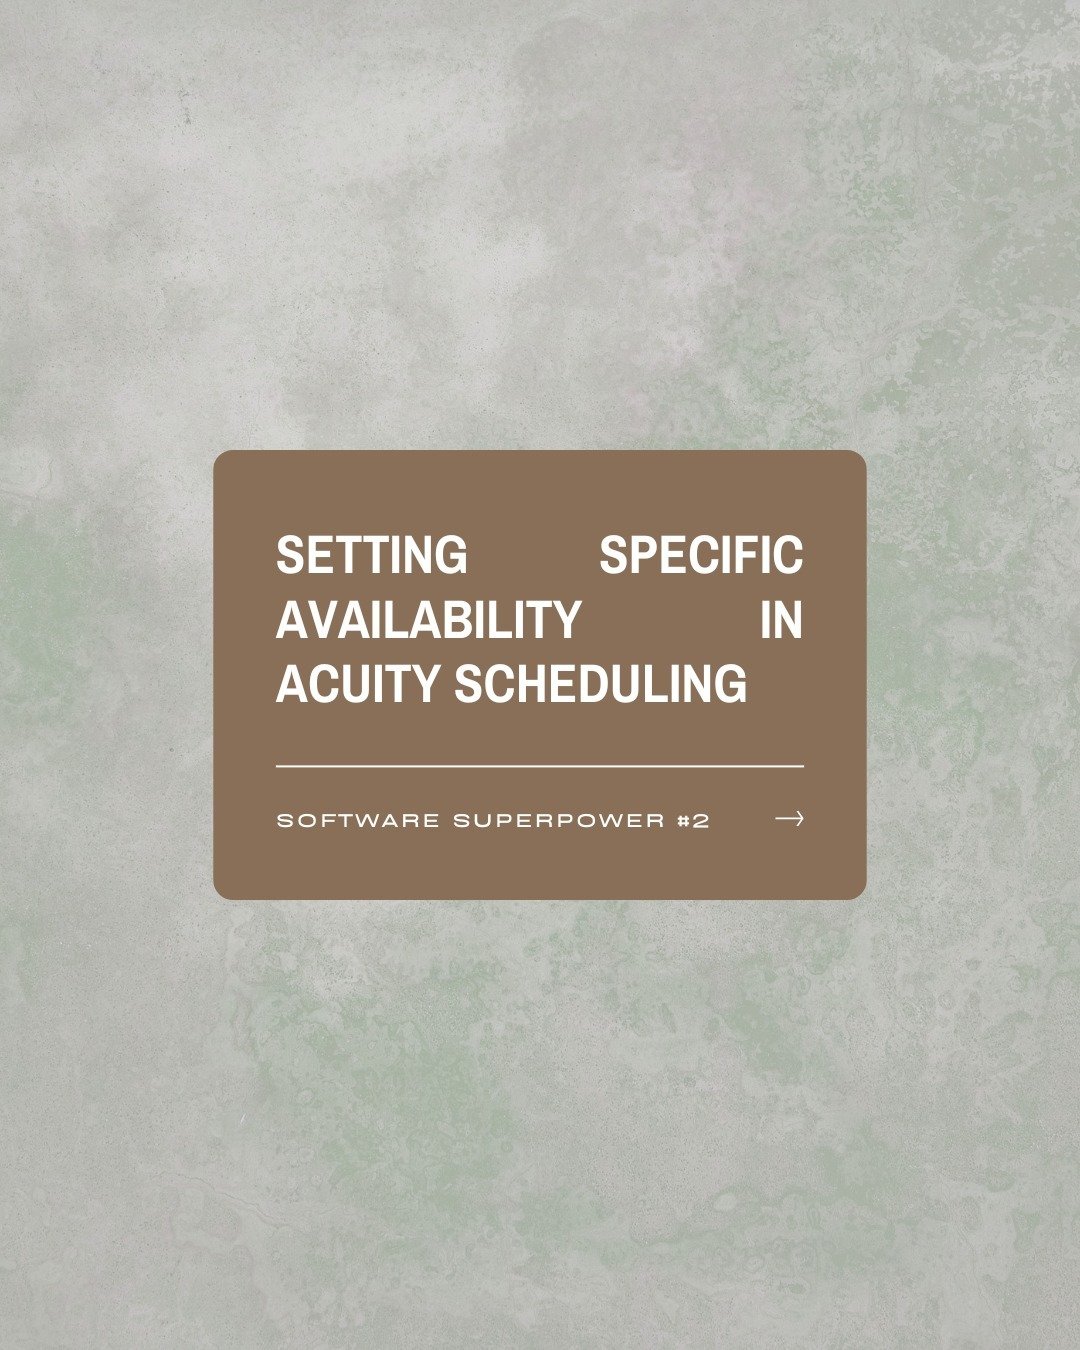 Acuity Superpower #2 - You can set general availability based on appointment types and add specific availability as well.⁣
⁣
Each designer has different availability, so categorizing the types of appointments and setting hours for each designer is a 